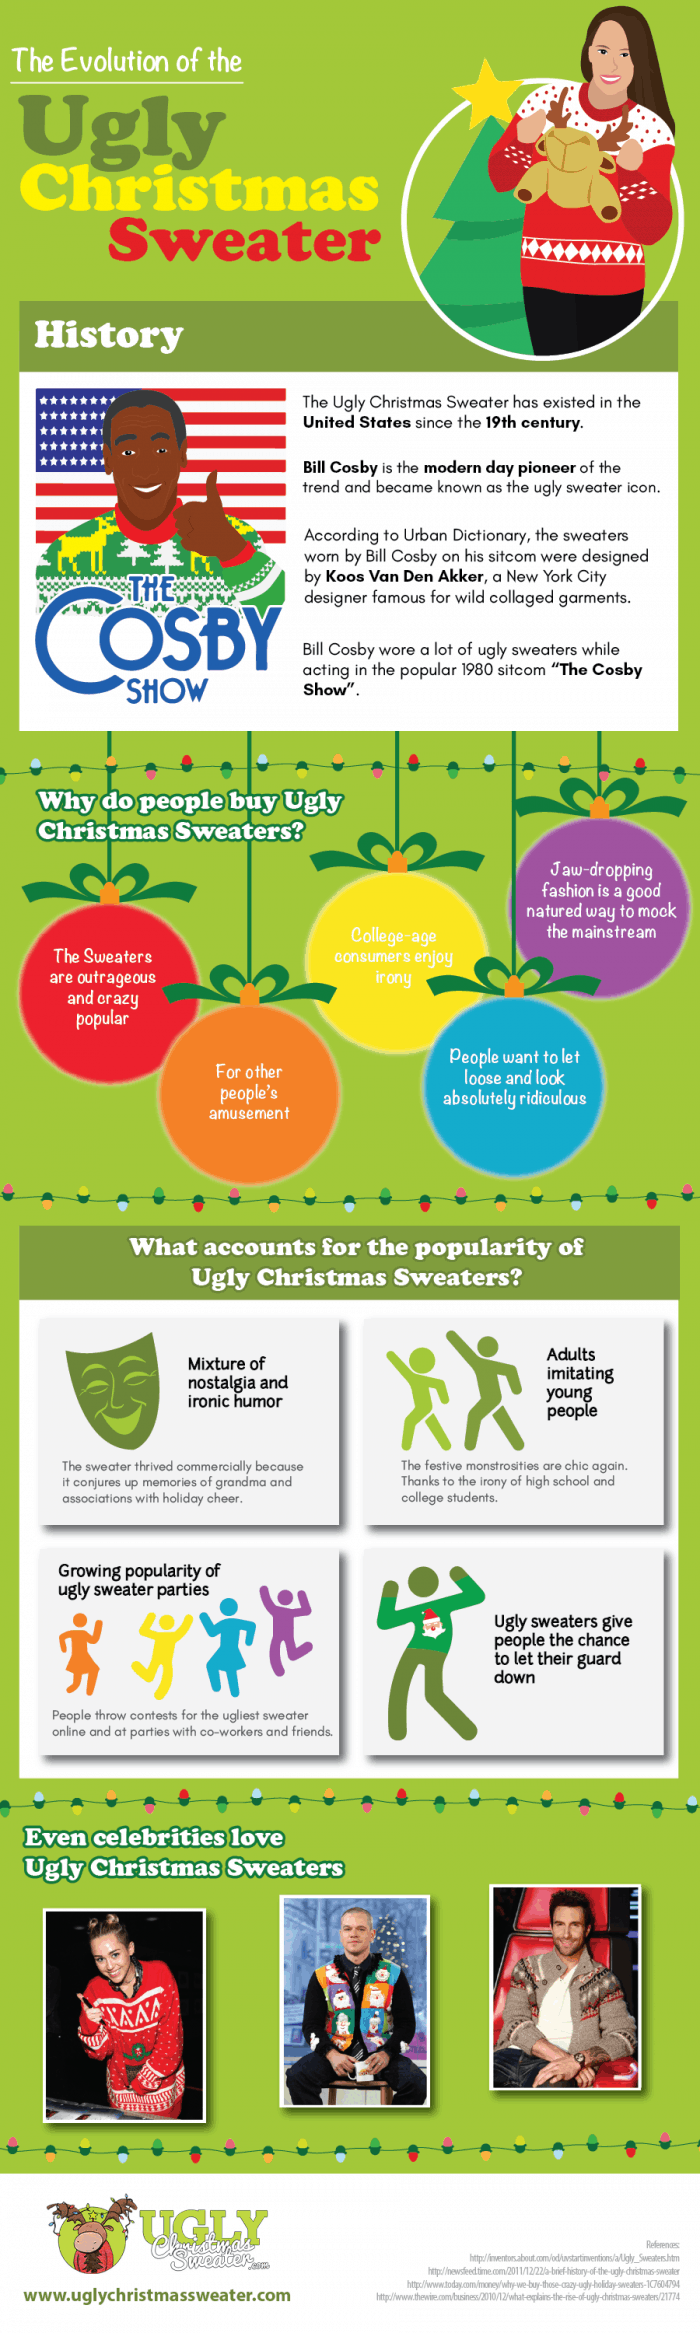 Evolution of the Ugly Christmas Sweater infographic